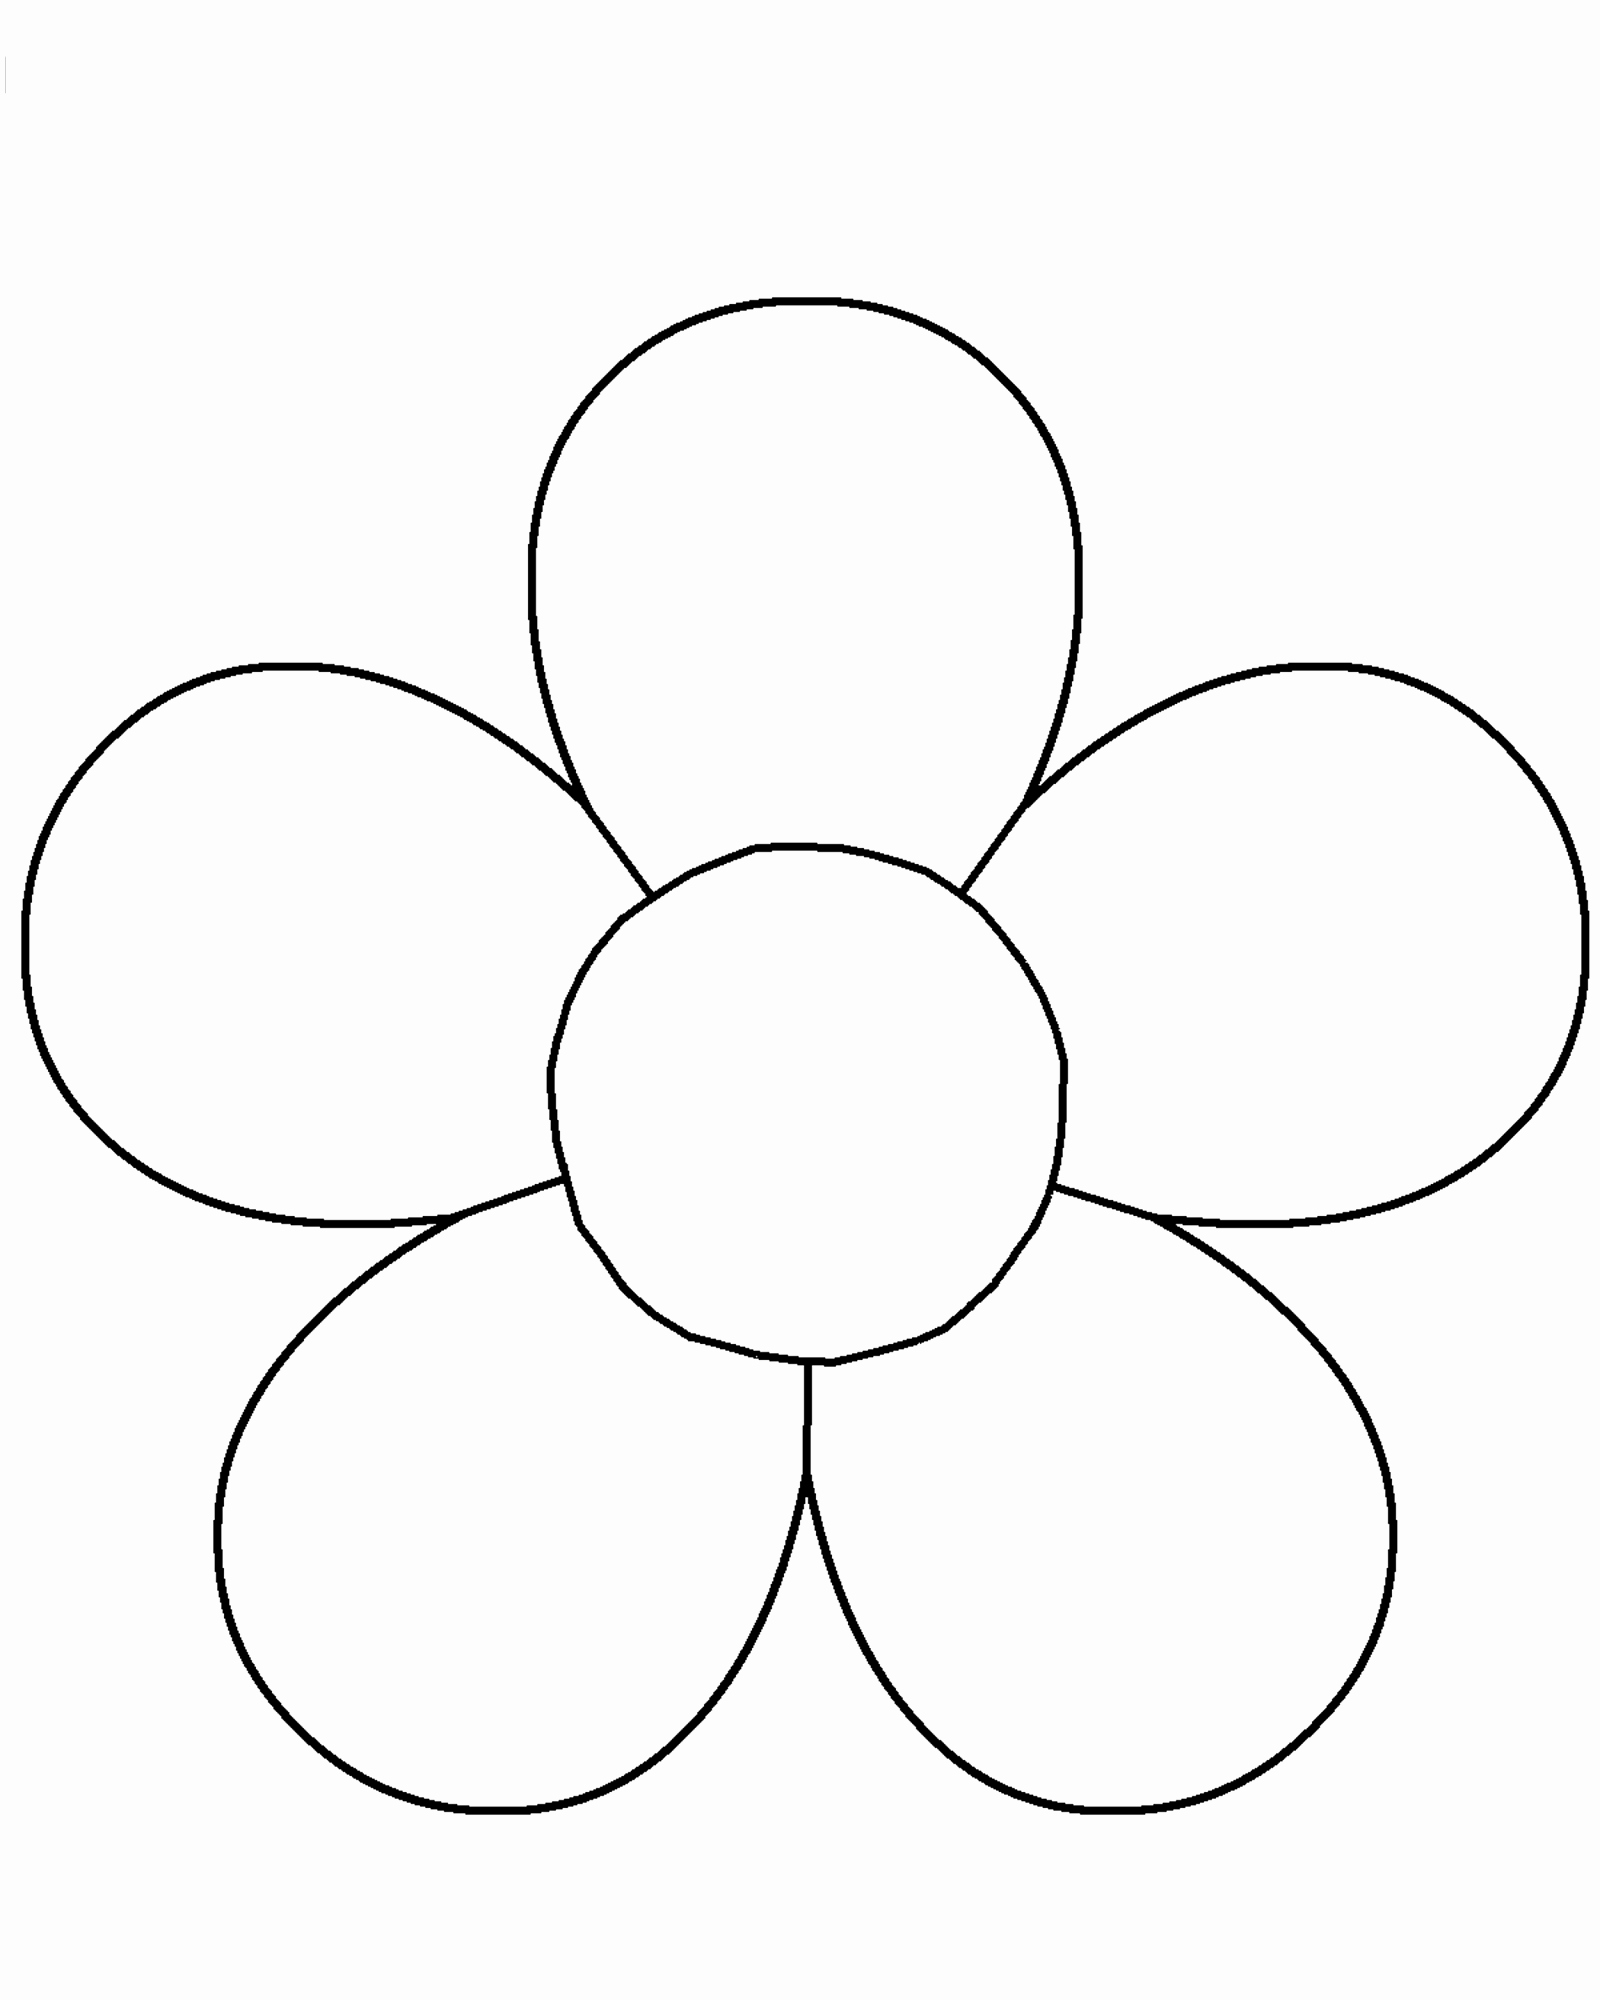 Printable Flower Template Cut Out Lovely Blank Flower Template 12 1600 X 2000